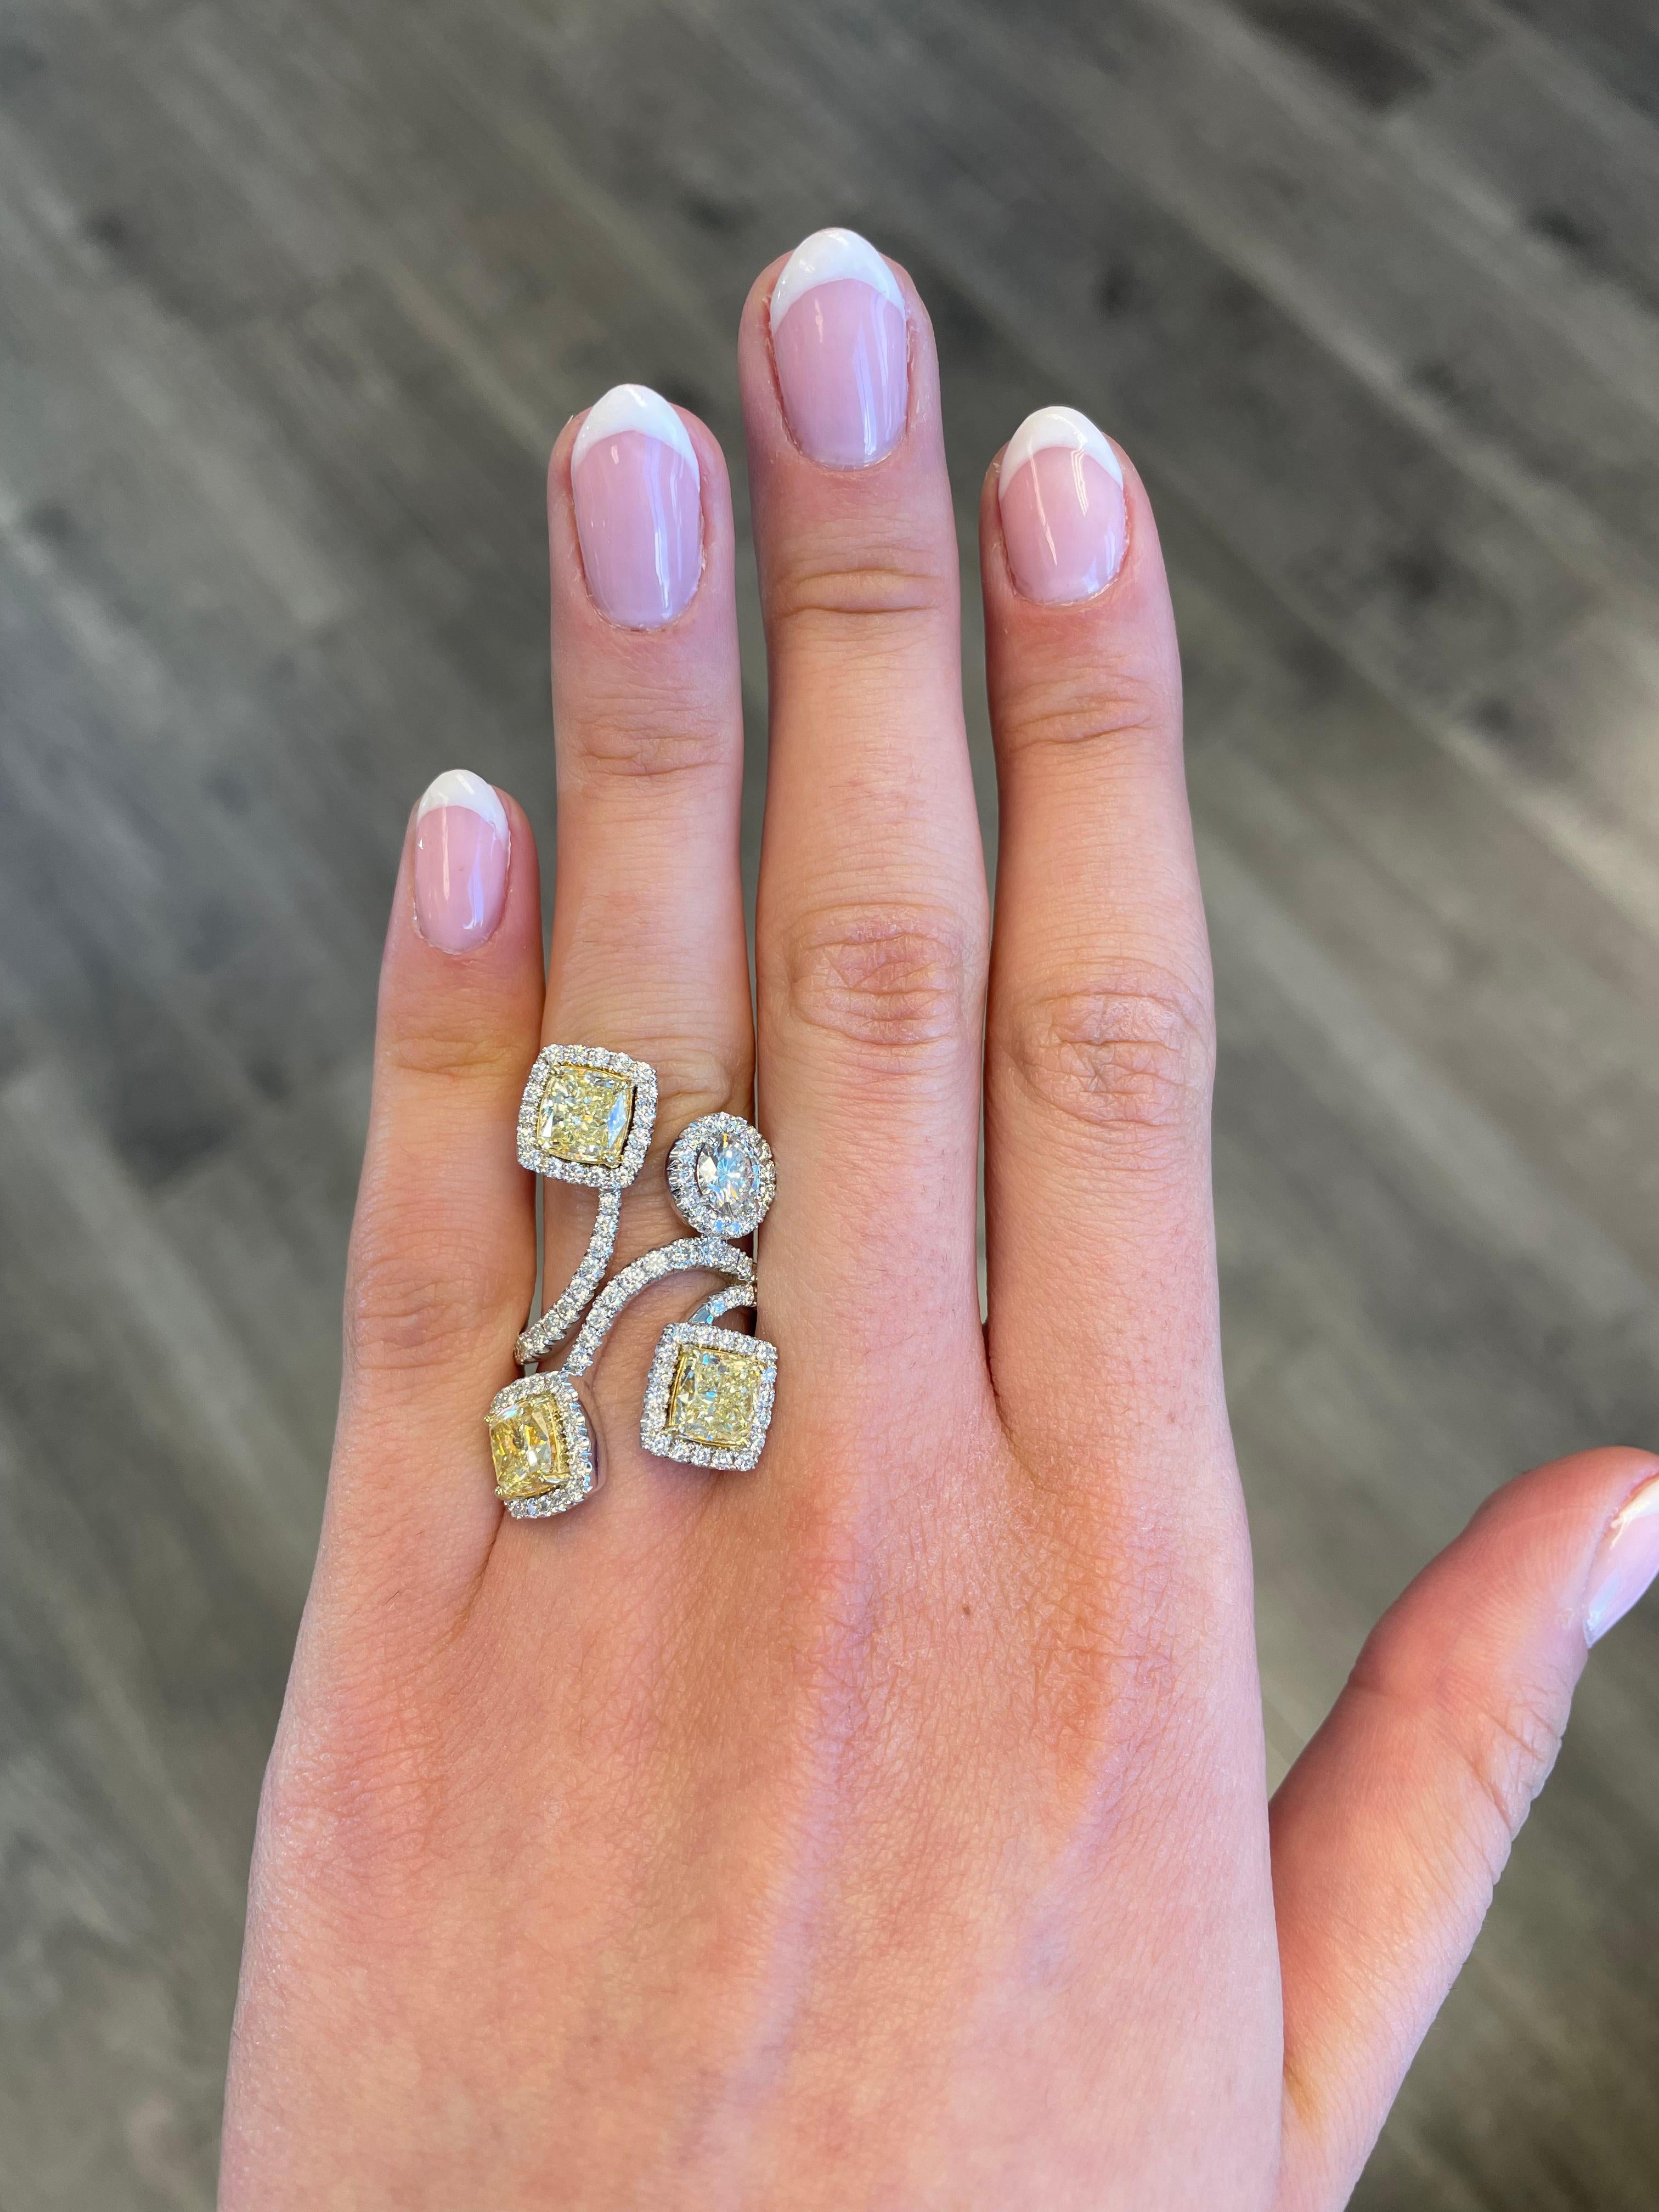 Modern multi yellow YZ diamonds open shank with 3 GIA reports. High jewelry by Alexander Beverly Hills.
7.03 carats total diamond weight.
3 cushion cut diamonds, 4.59 carats total. Both Y/Z color, VS2-SI1 clarity and GIA certified. 1.44 carats of